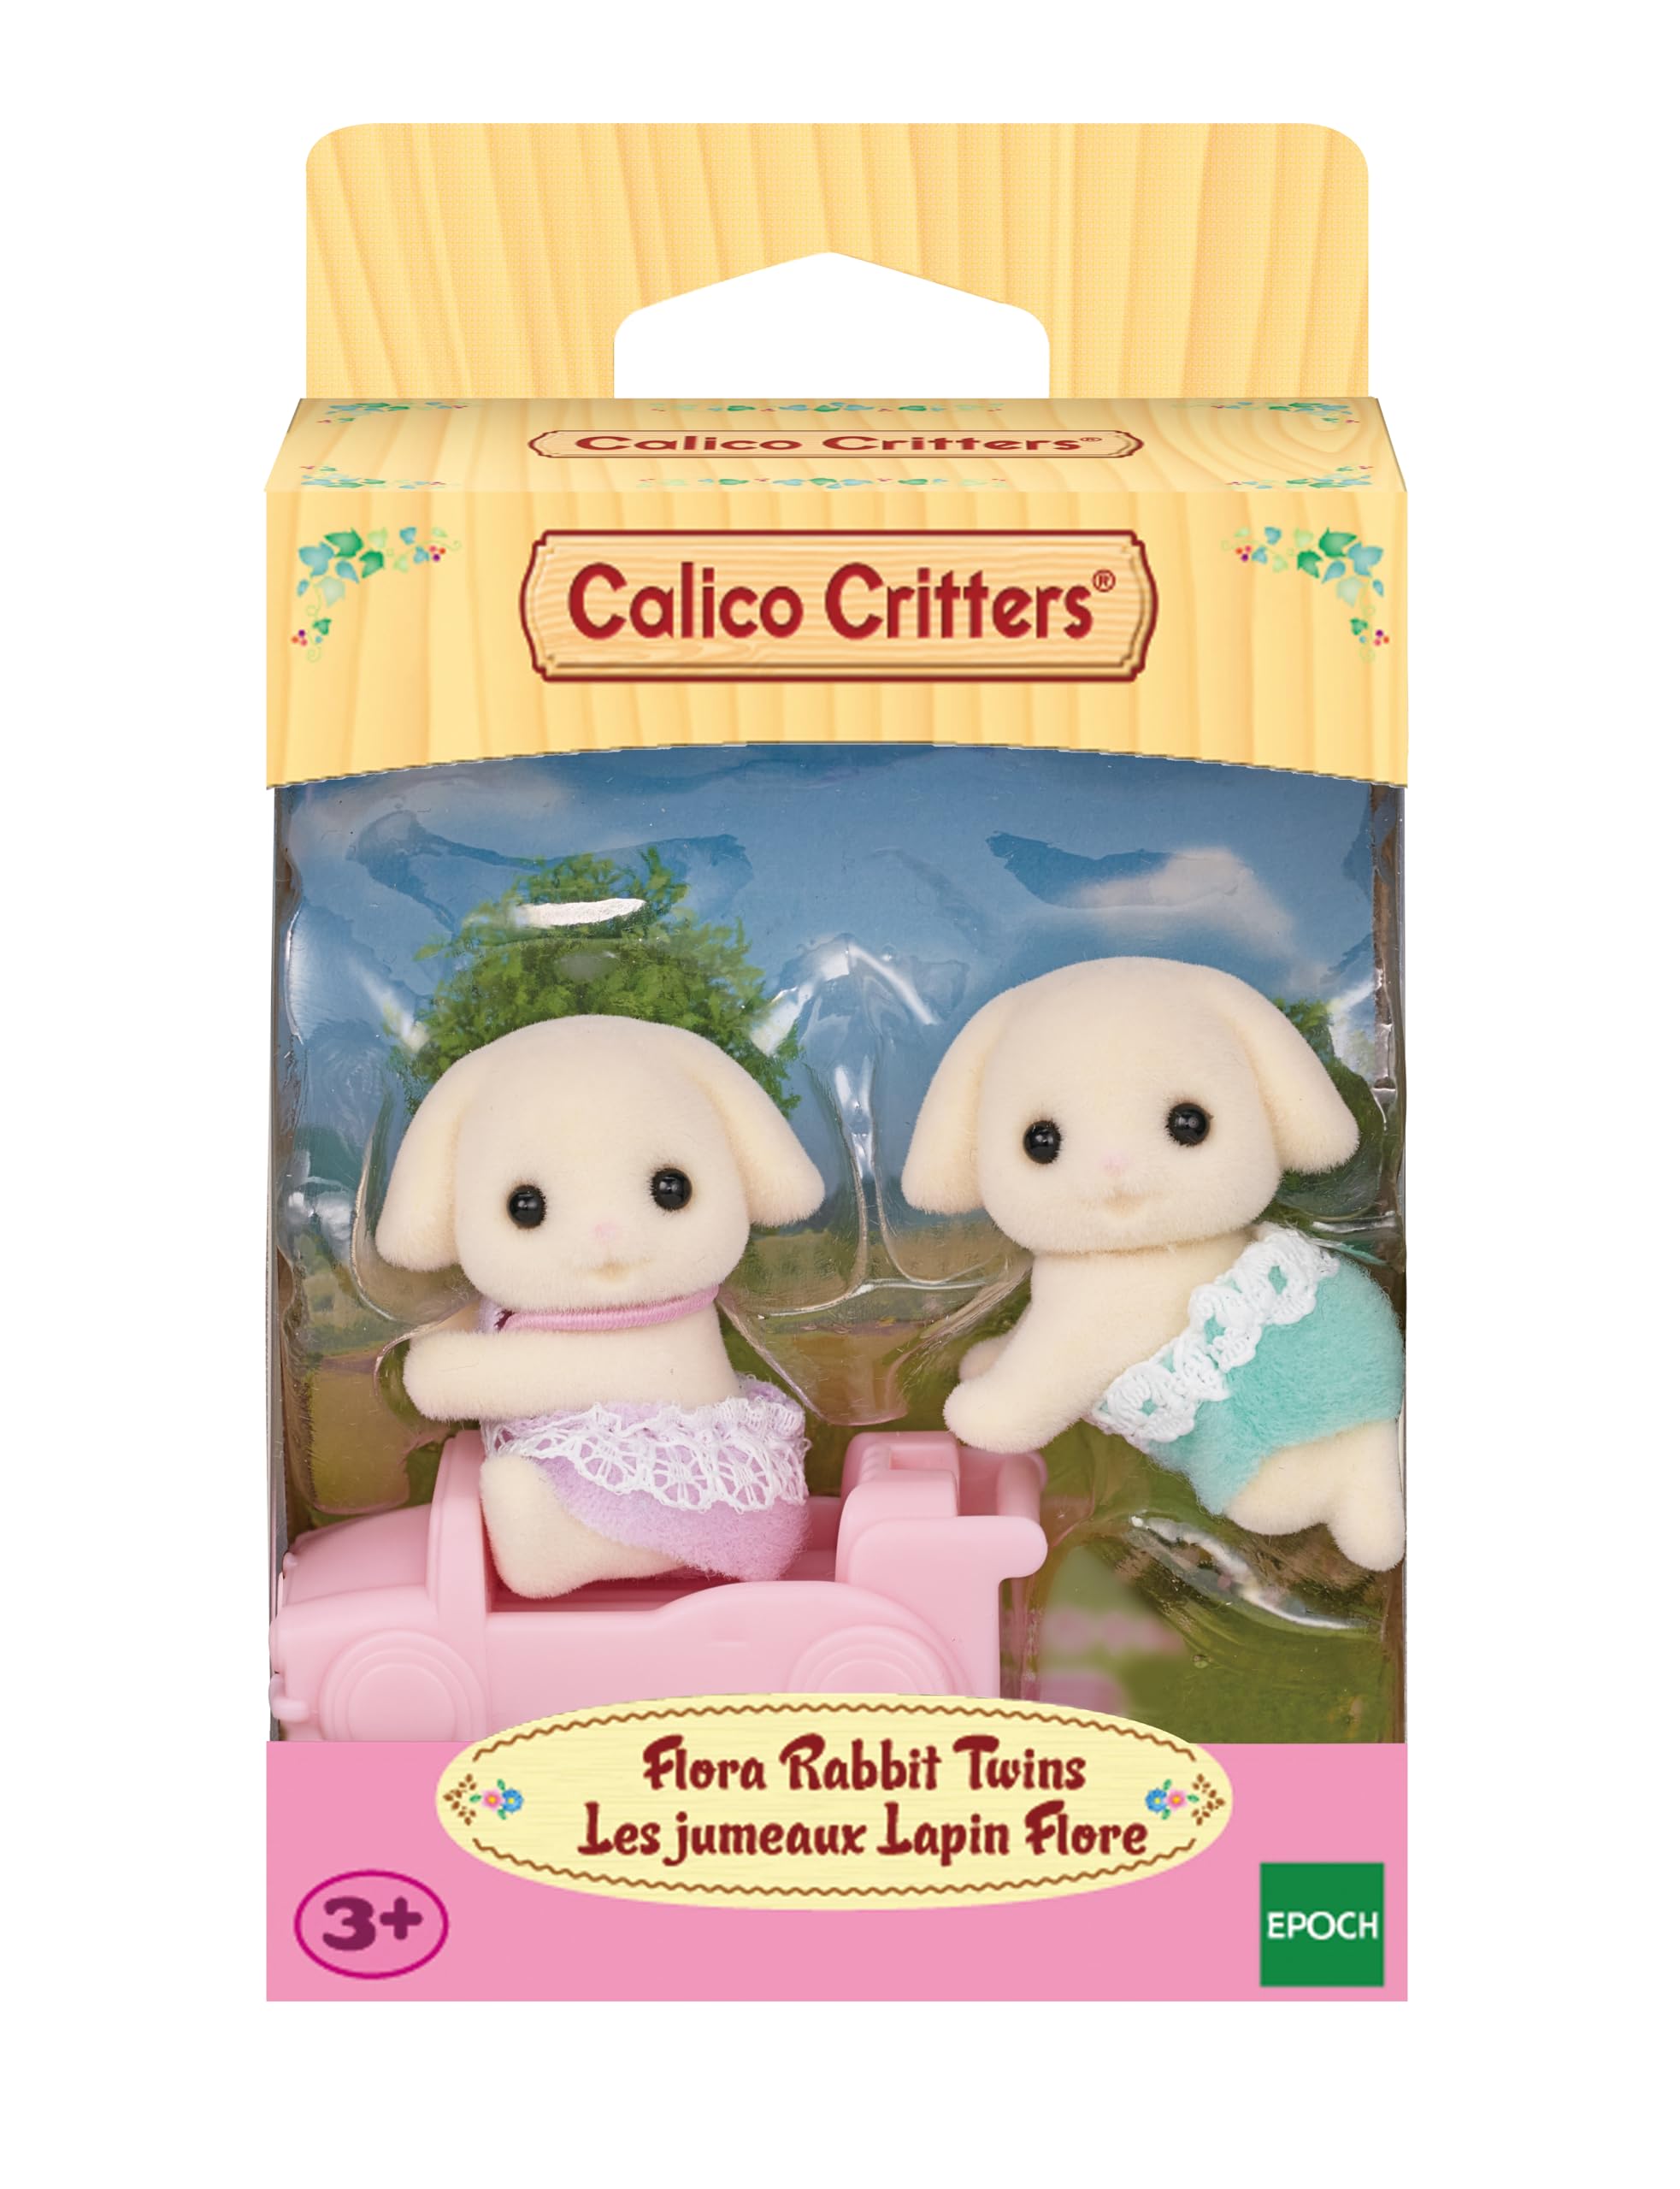 Calico Critters Flora Rabbit Twins - Set of 2 Collectible Doll Figures for Ages 3+